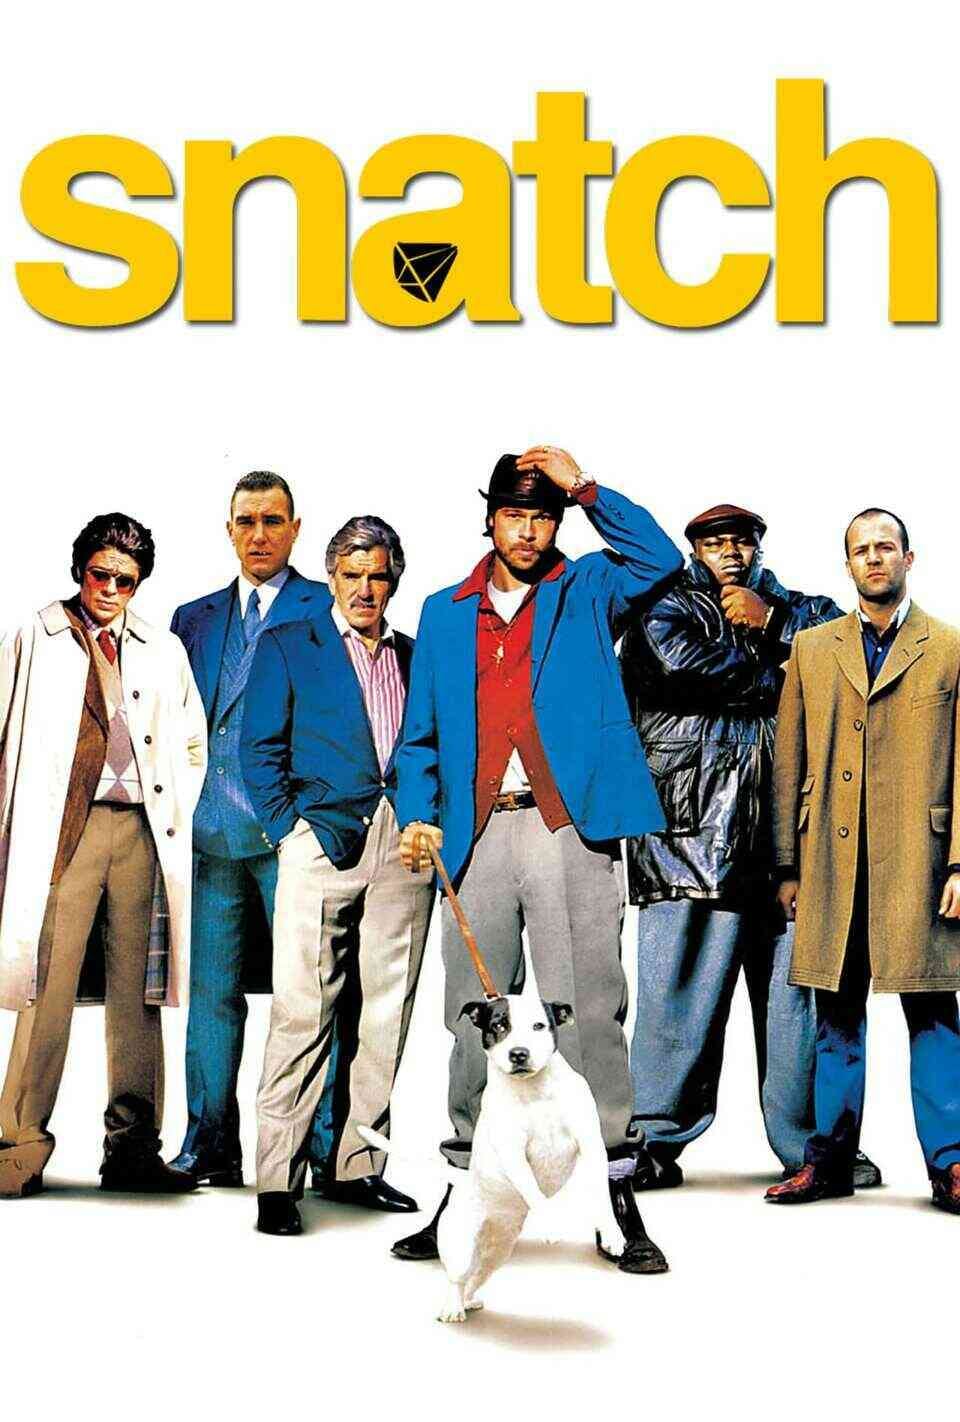 Read Snatch screenplay (poster)